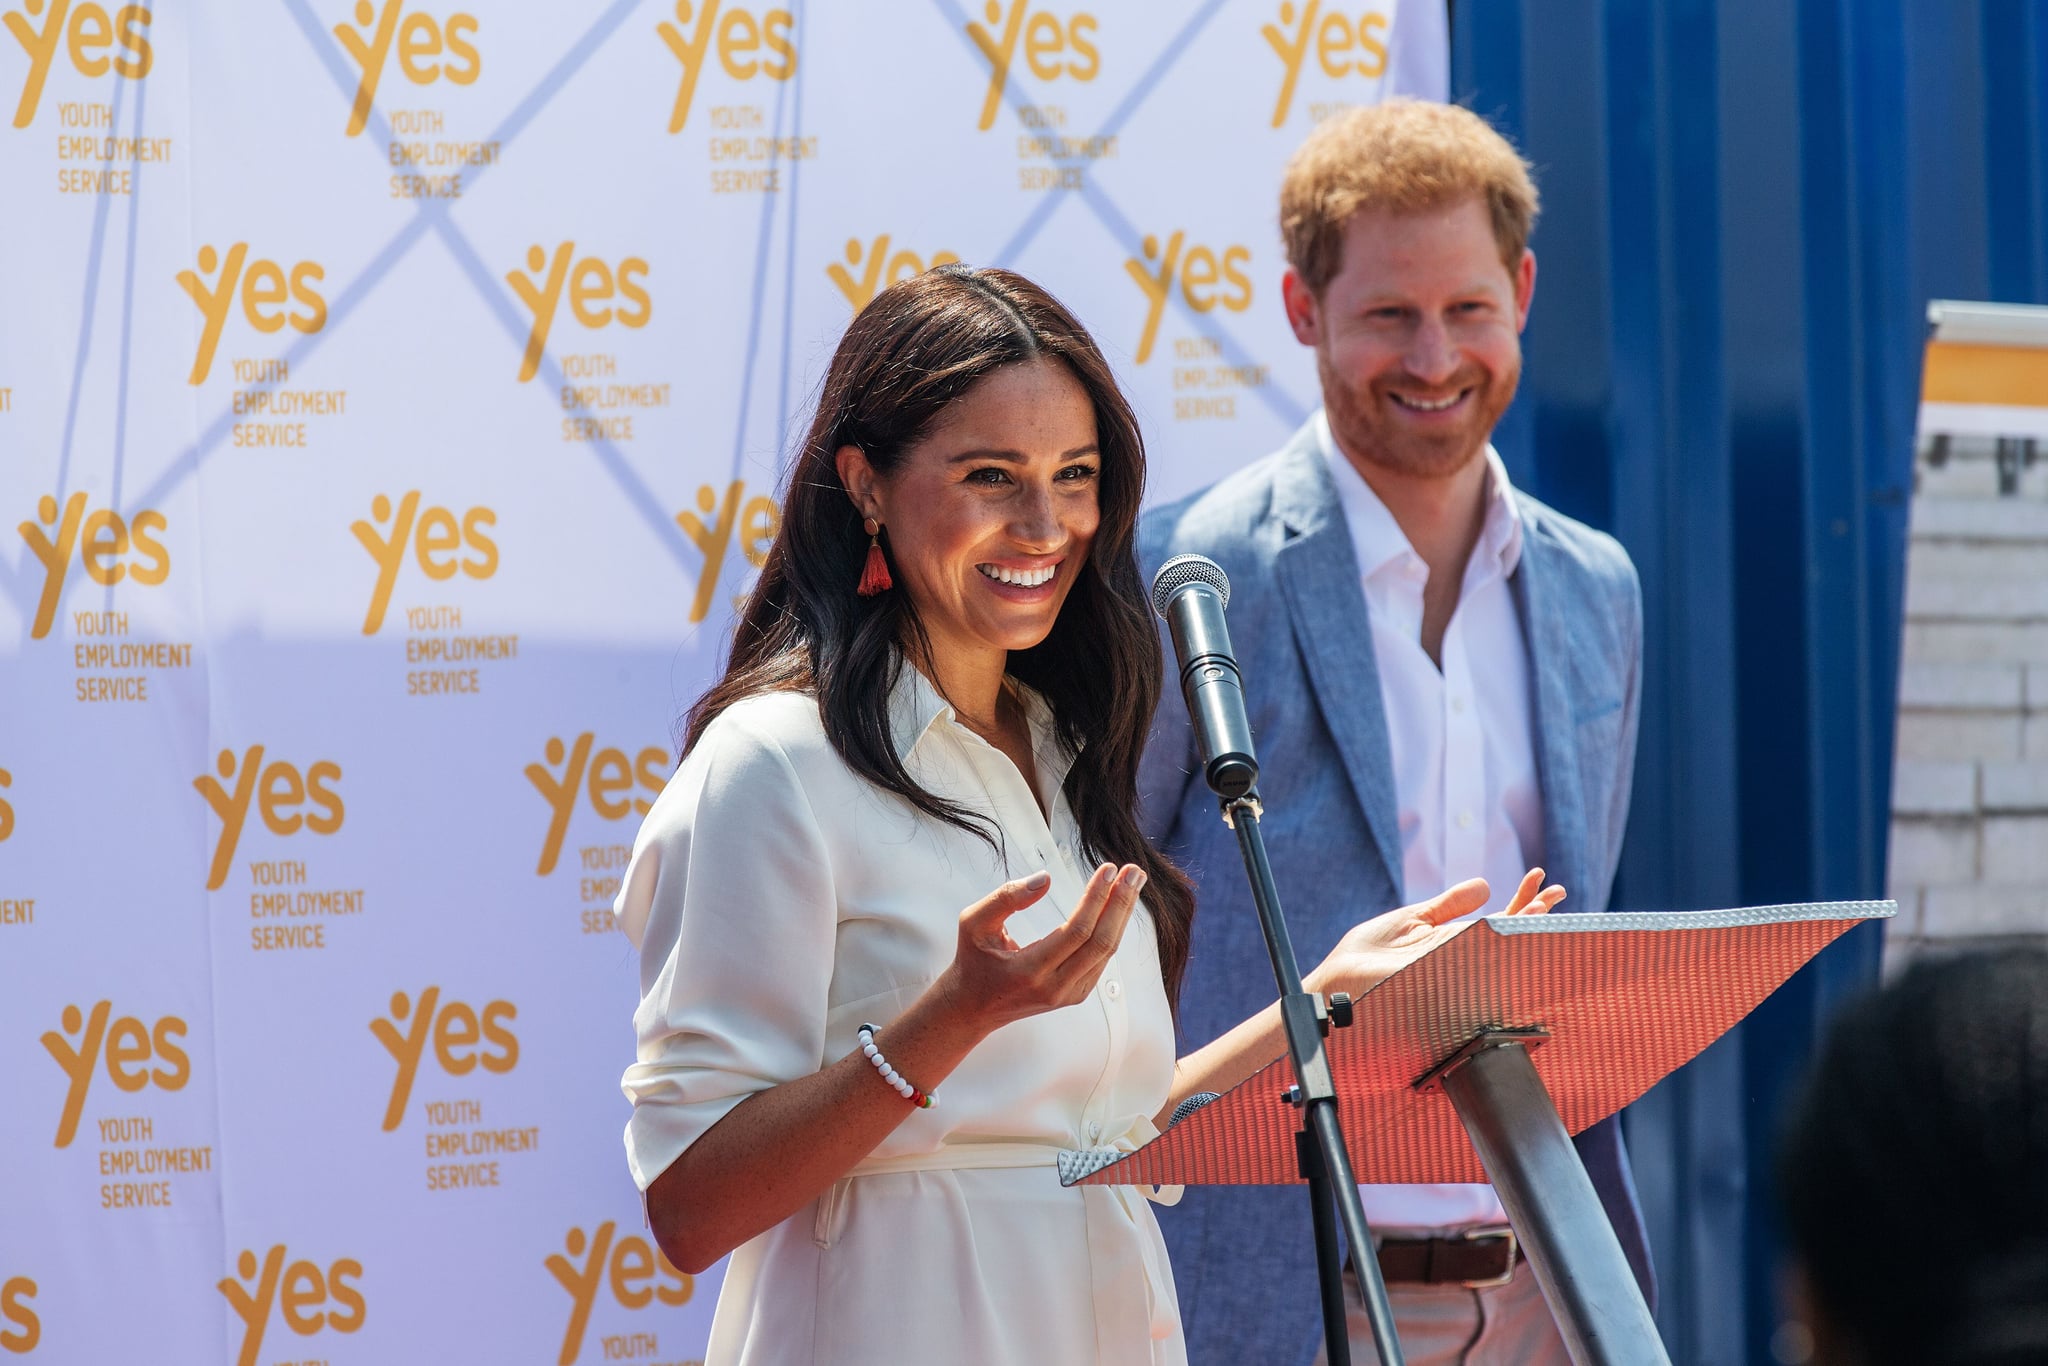 Meghan, Duchess of Sussex(L), is watched by Britain's Prince Harry, Duke of Sussex(R) as  she delivers a speech at the Youth Employment Services Hub in Tembisa township, Johannesburg, on October 2, 2019. - Meghan Markle is suing Britain's Mail On Sunday newspaper over the publication of a private letter, her husband Prince Harry has said, warning they had been forced to take action against 